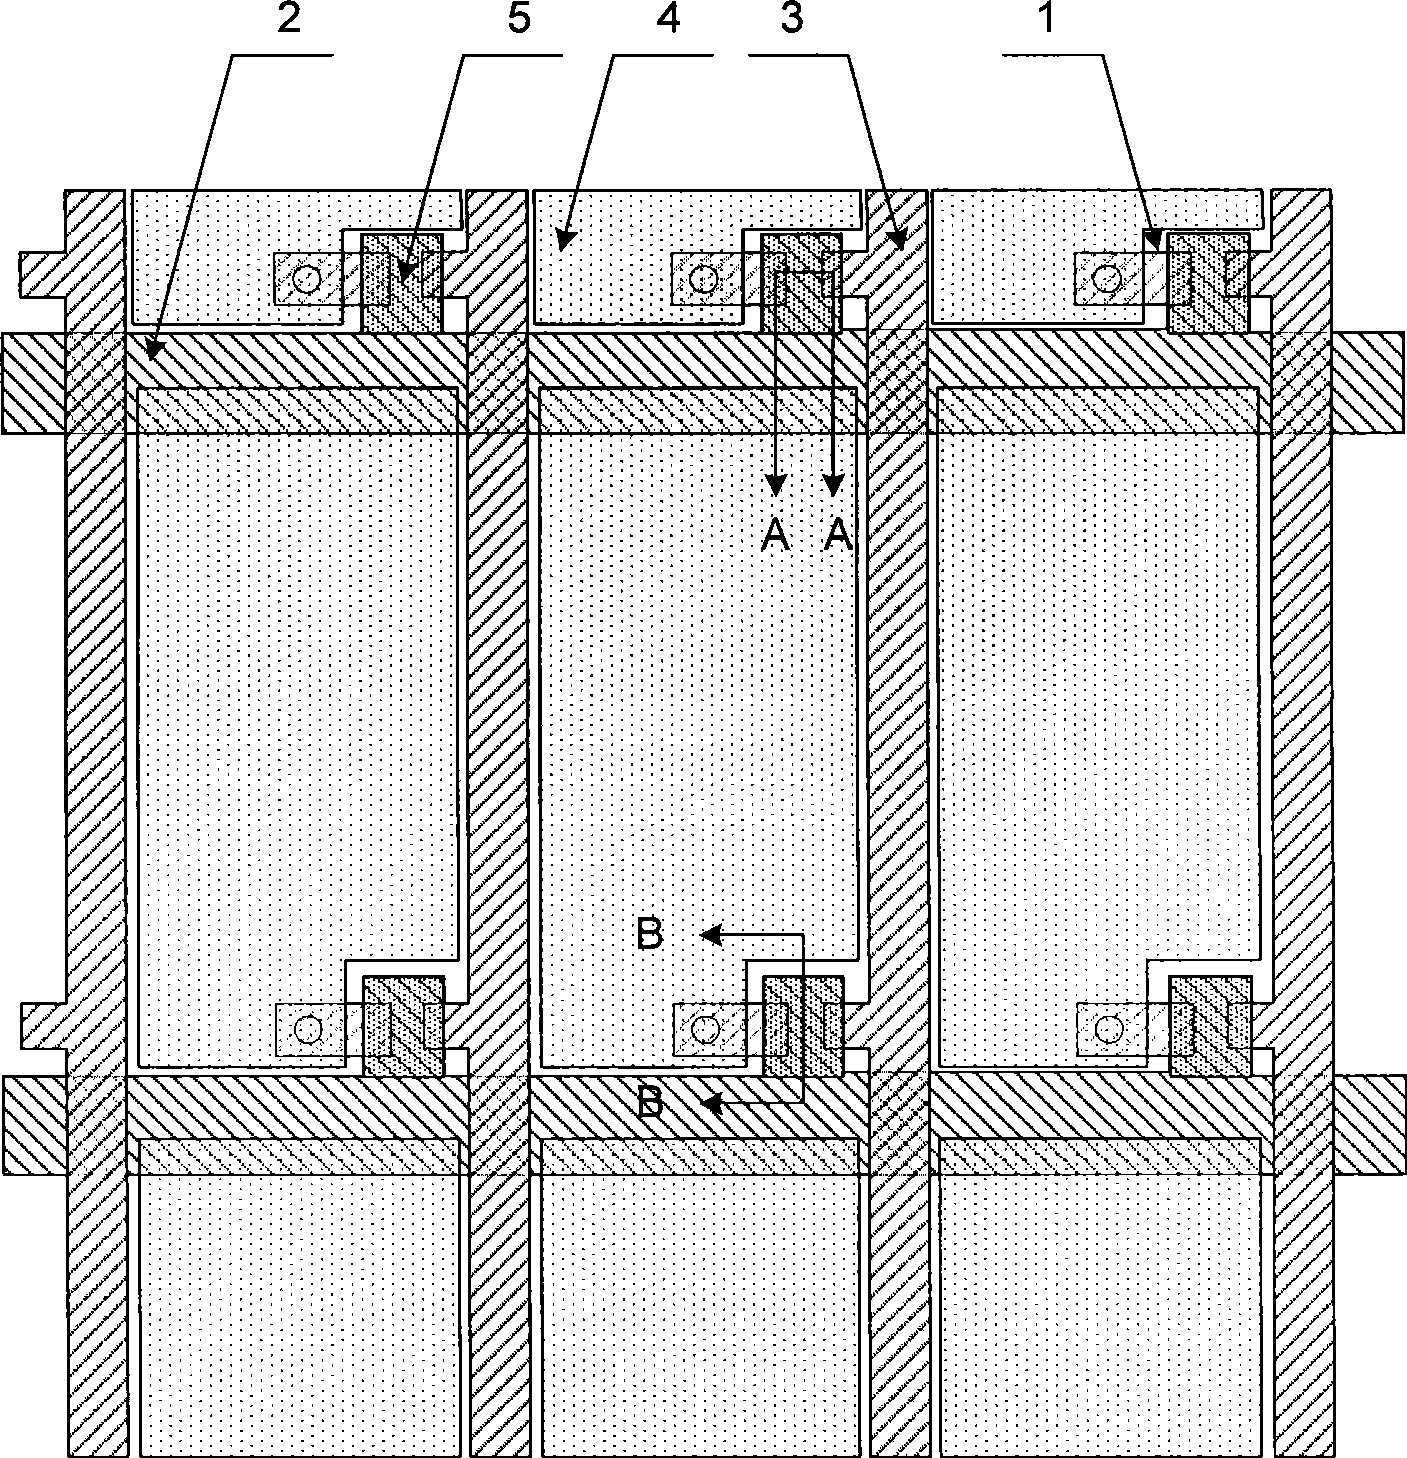 TFT-LCD pixel structure and method for manufacturing same